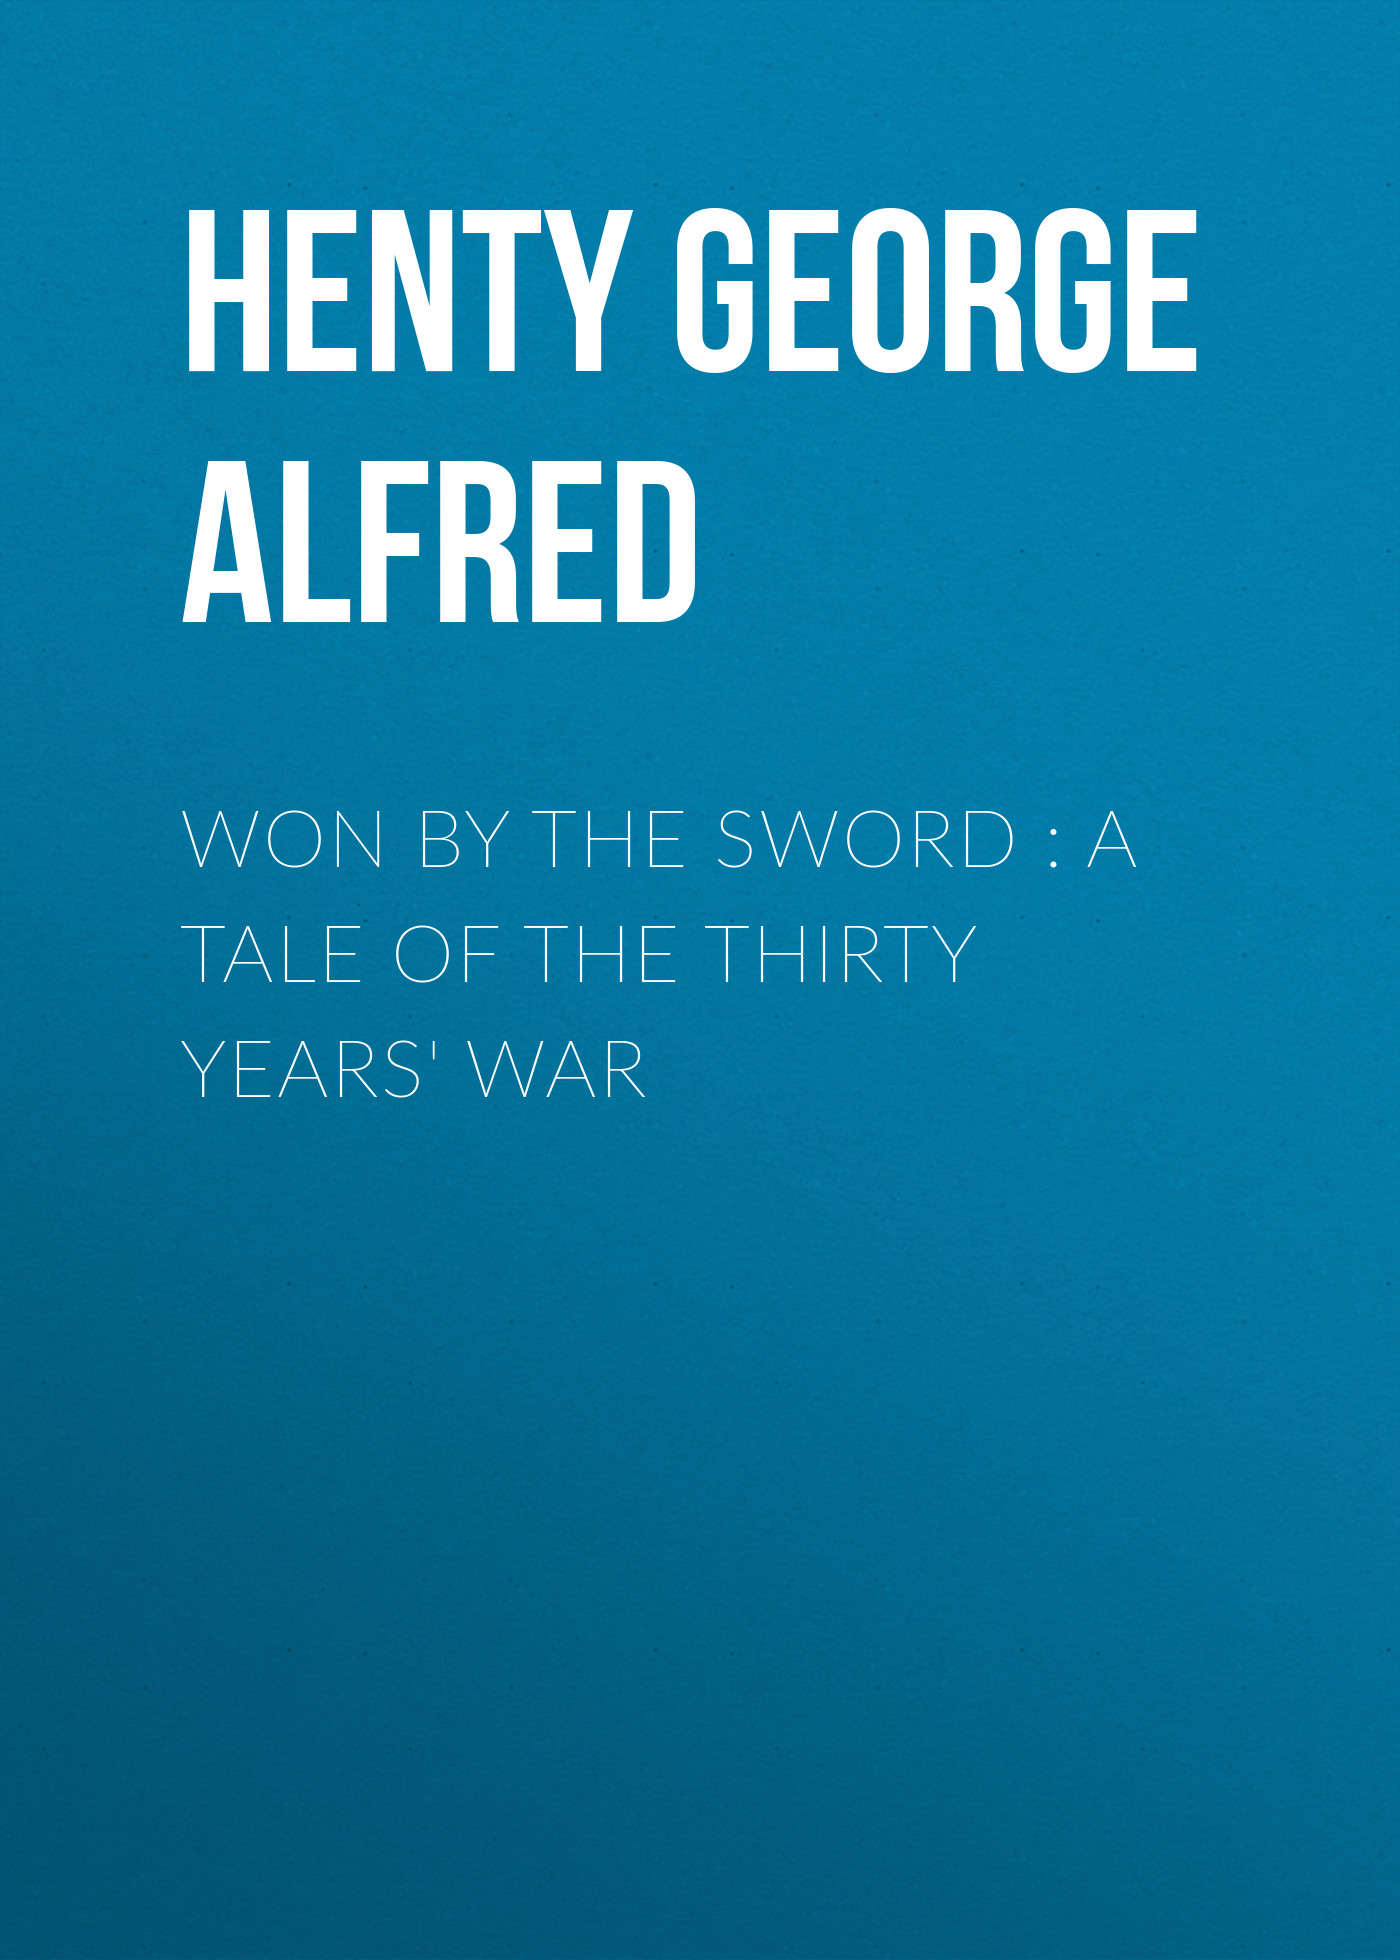 Won By the Sword : a tale of the Thirty Years'War